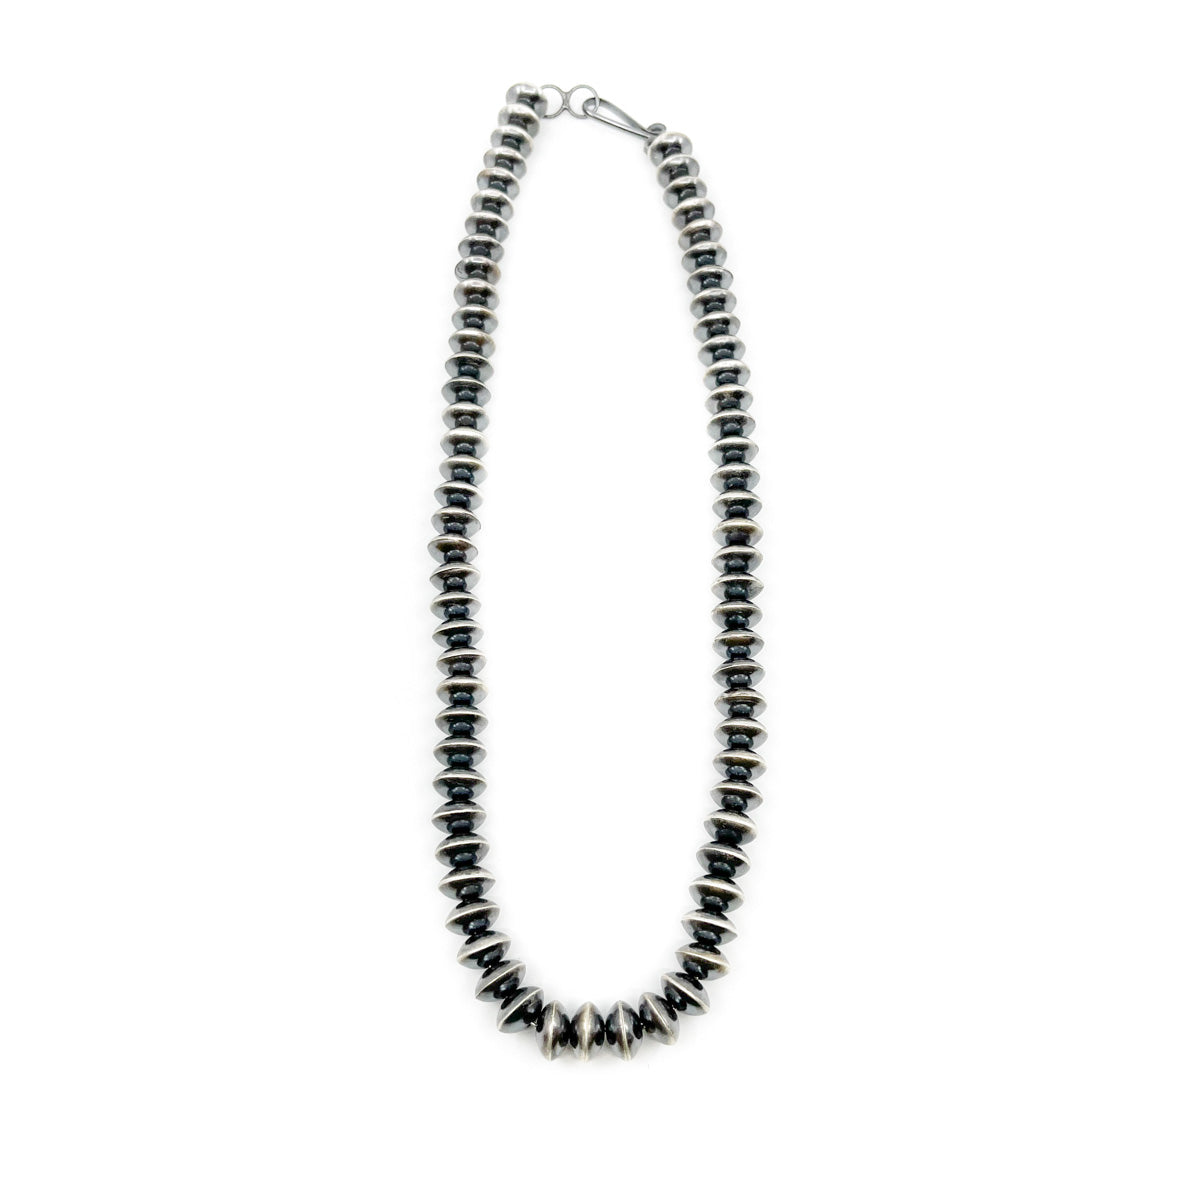 Strand of Handcrafted Silver Beads - Michelle Jameson - 20 inches